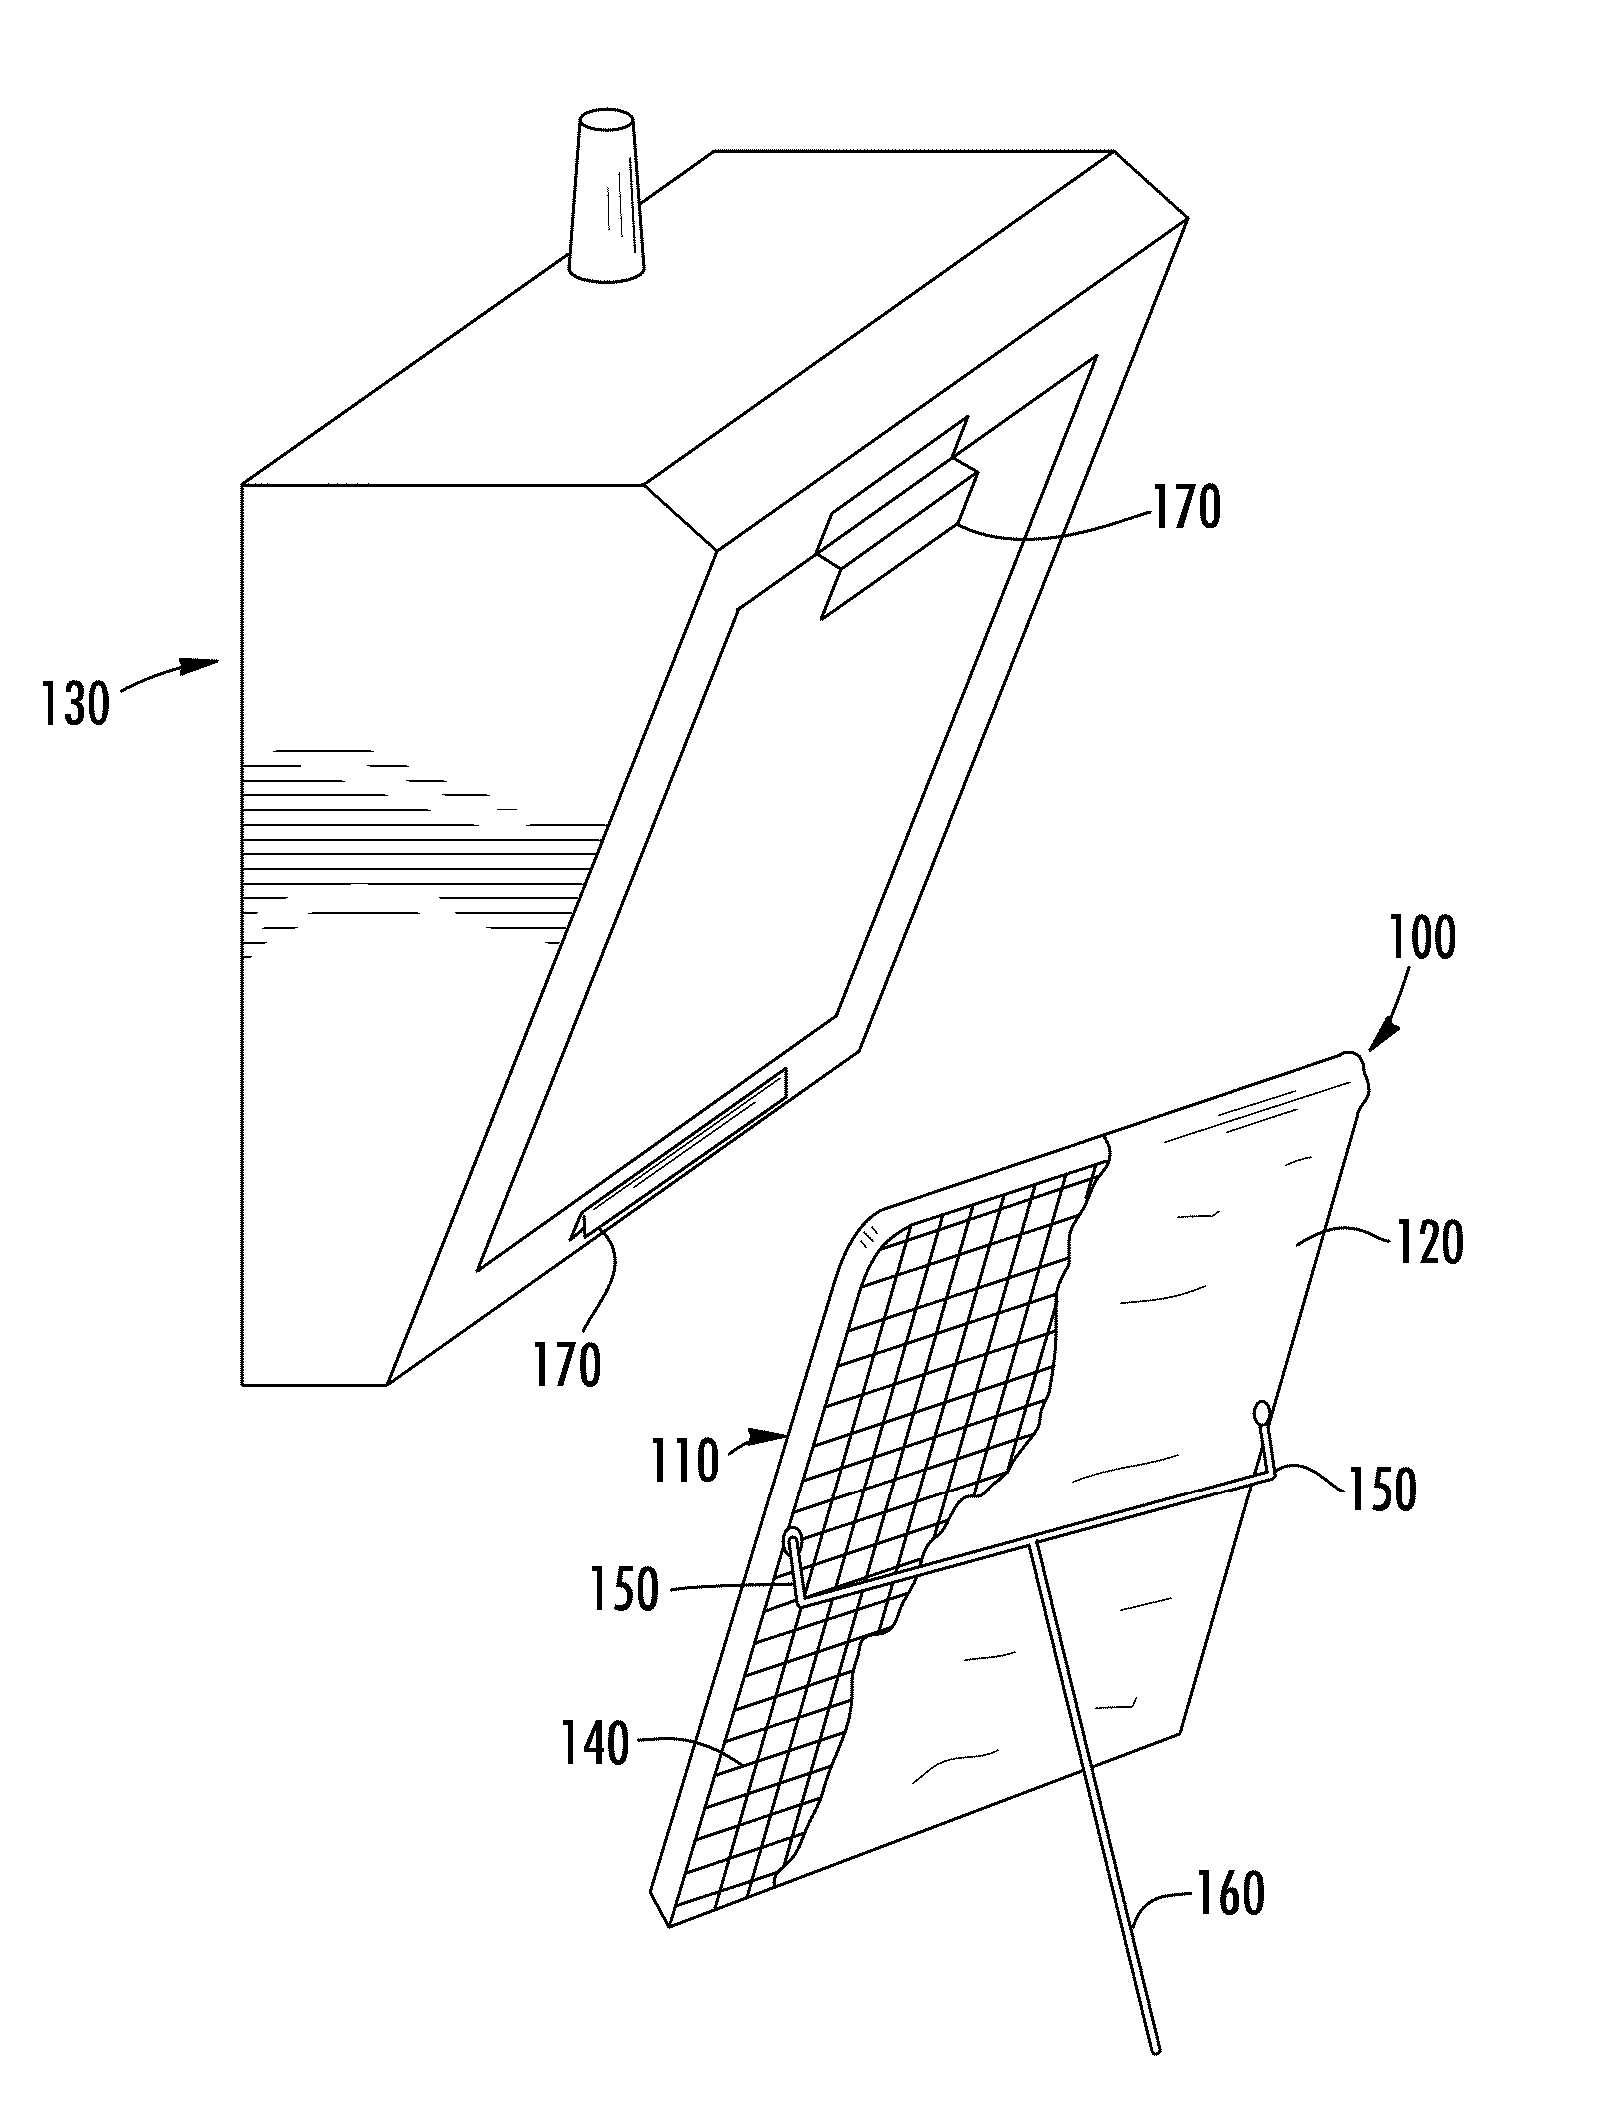 Disposable grease filter for air filtration system and method of manufacturing same